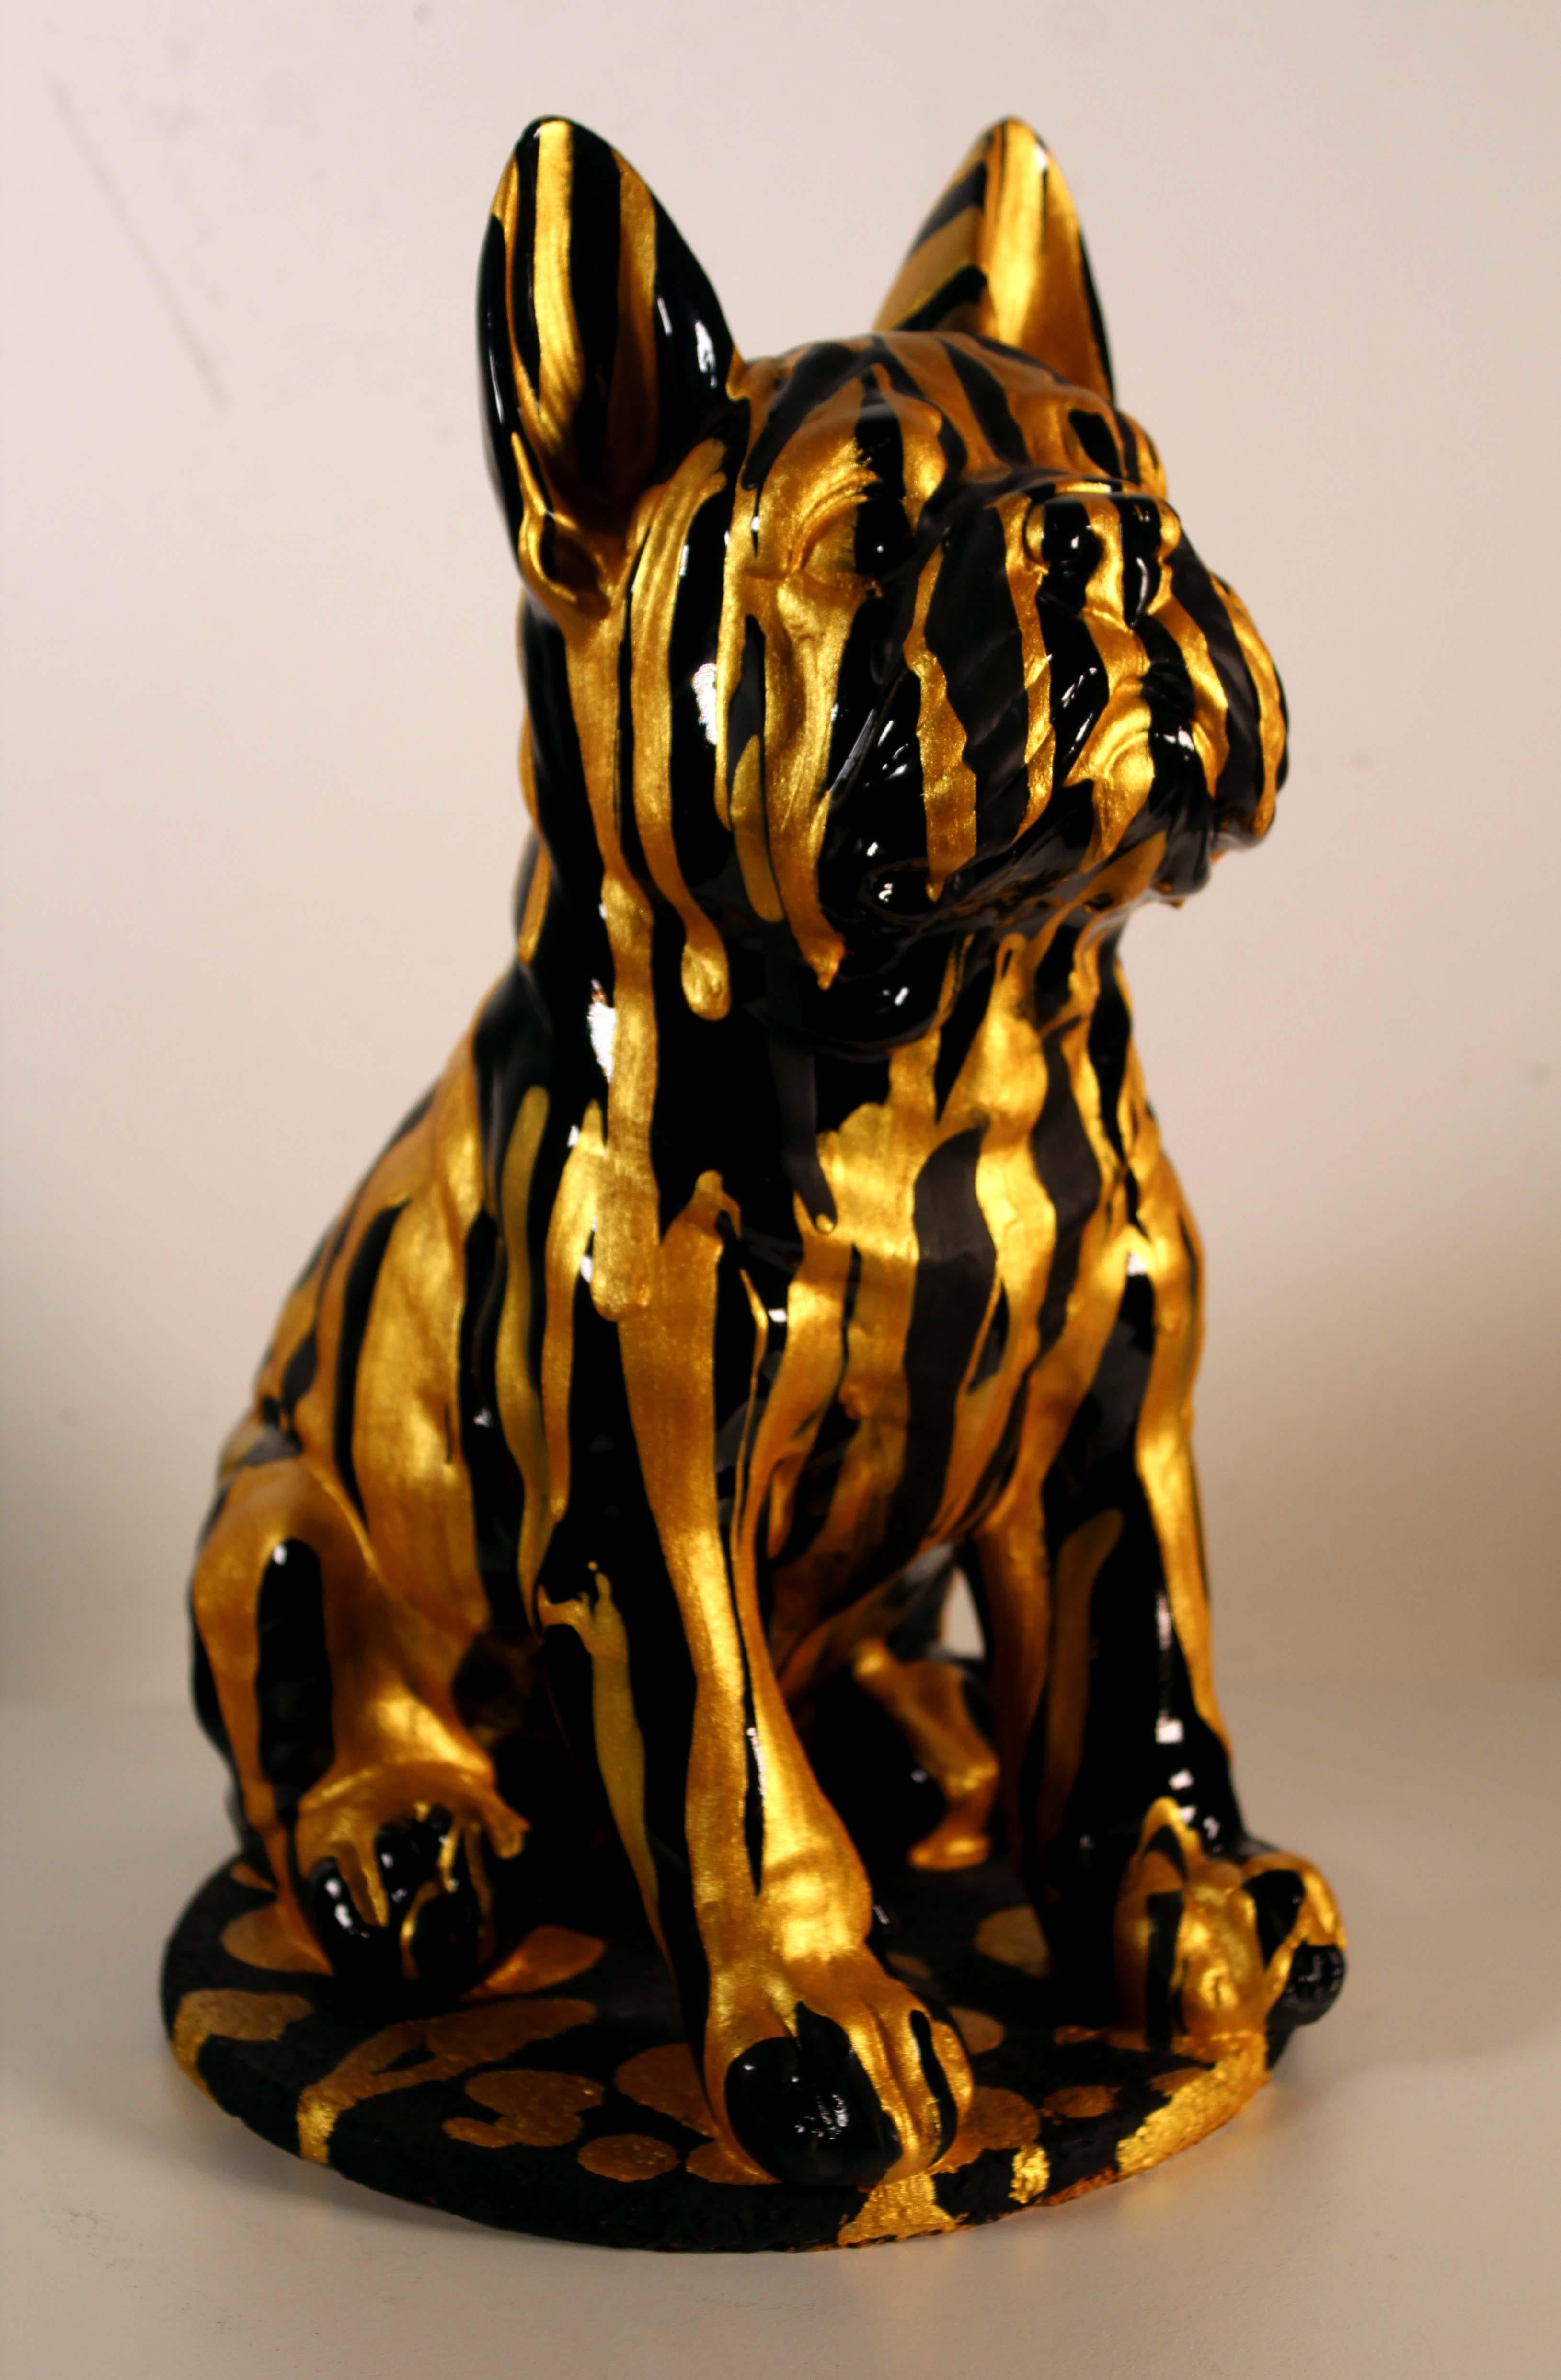 This gold drip Frenchie dog sculpture homage to Godiva is up for consideration. The gold drips against the black background allow this piece to stand out in any home. Signed by artist. 
Dimensions: 7